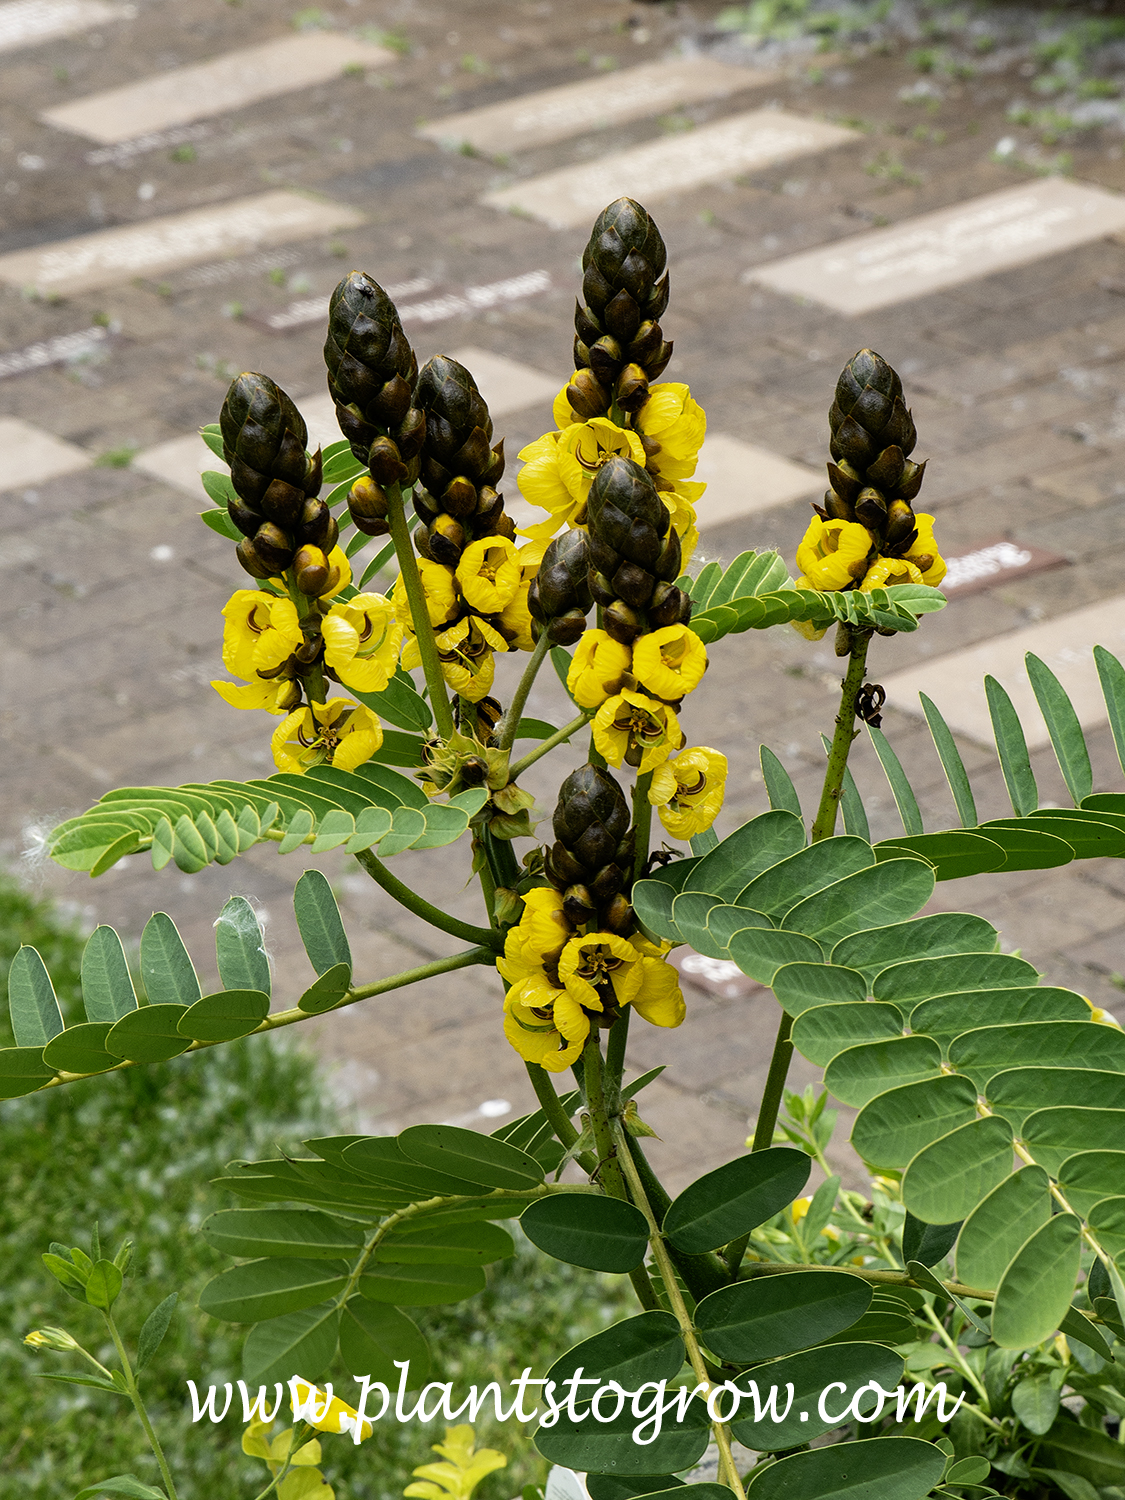 Popcorn Cassia (Senna didymobotrya) 
The raceme of yellow flowers features dark buds at the top. The florets bloom from the bottom to the top.